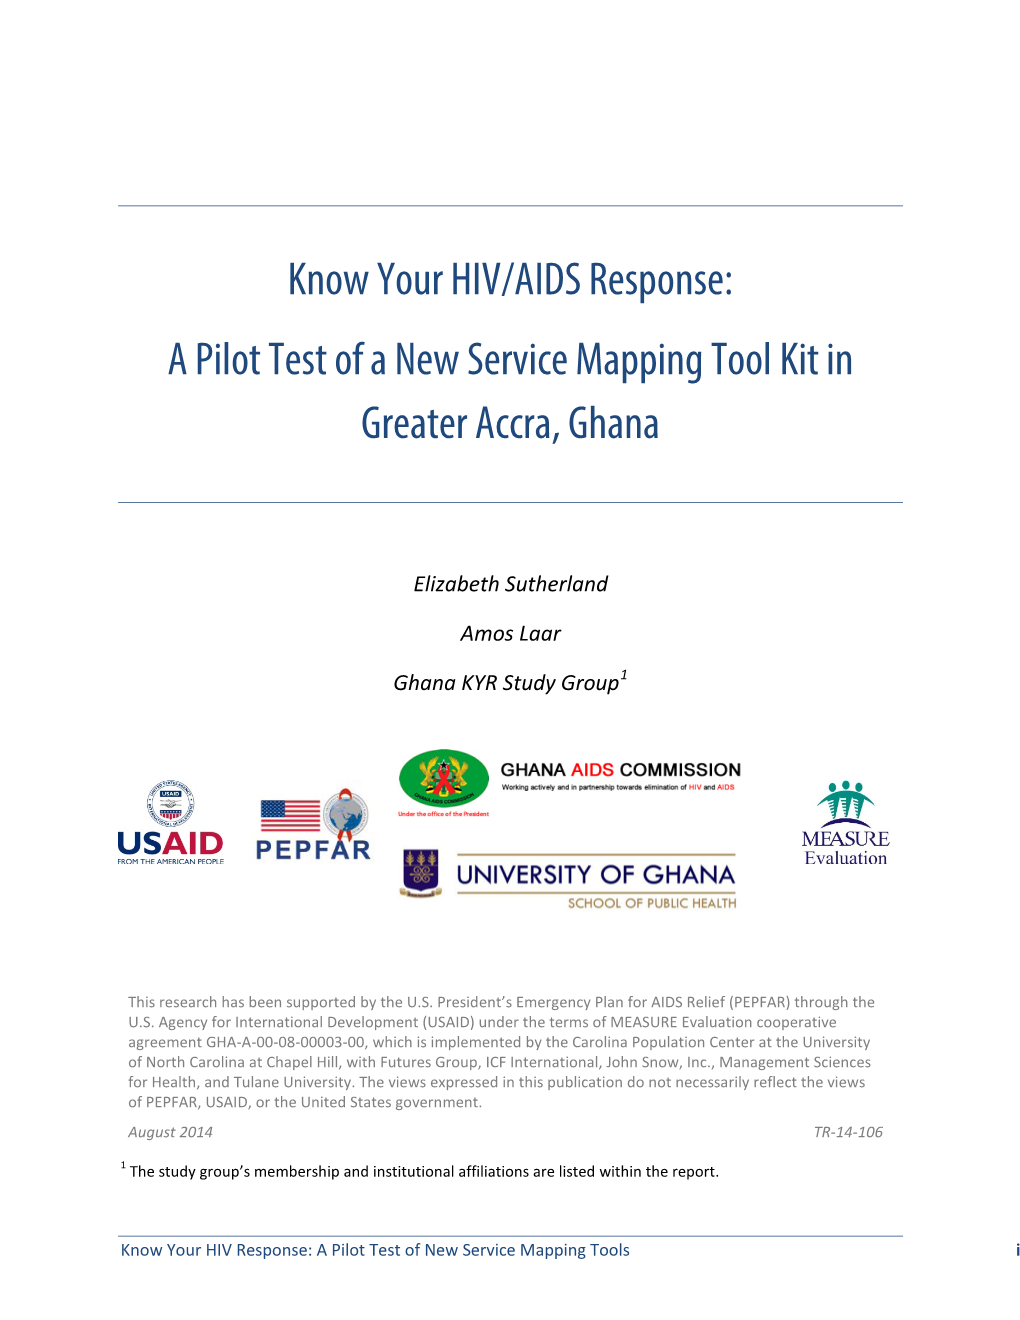 Know Your HIV/AIDS Response: a Pilot Test of a New Service Mapping Tool Kit in Greater Accra, Ghana